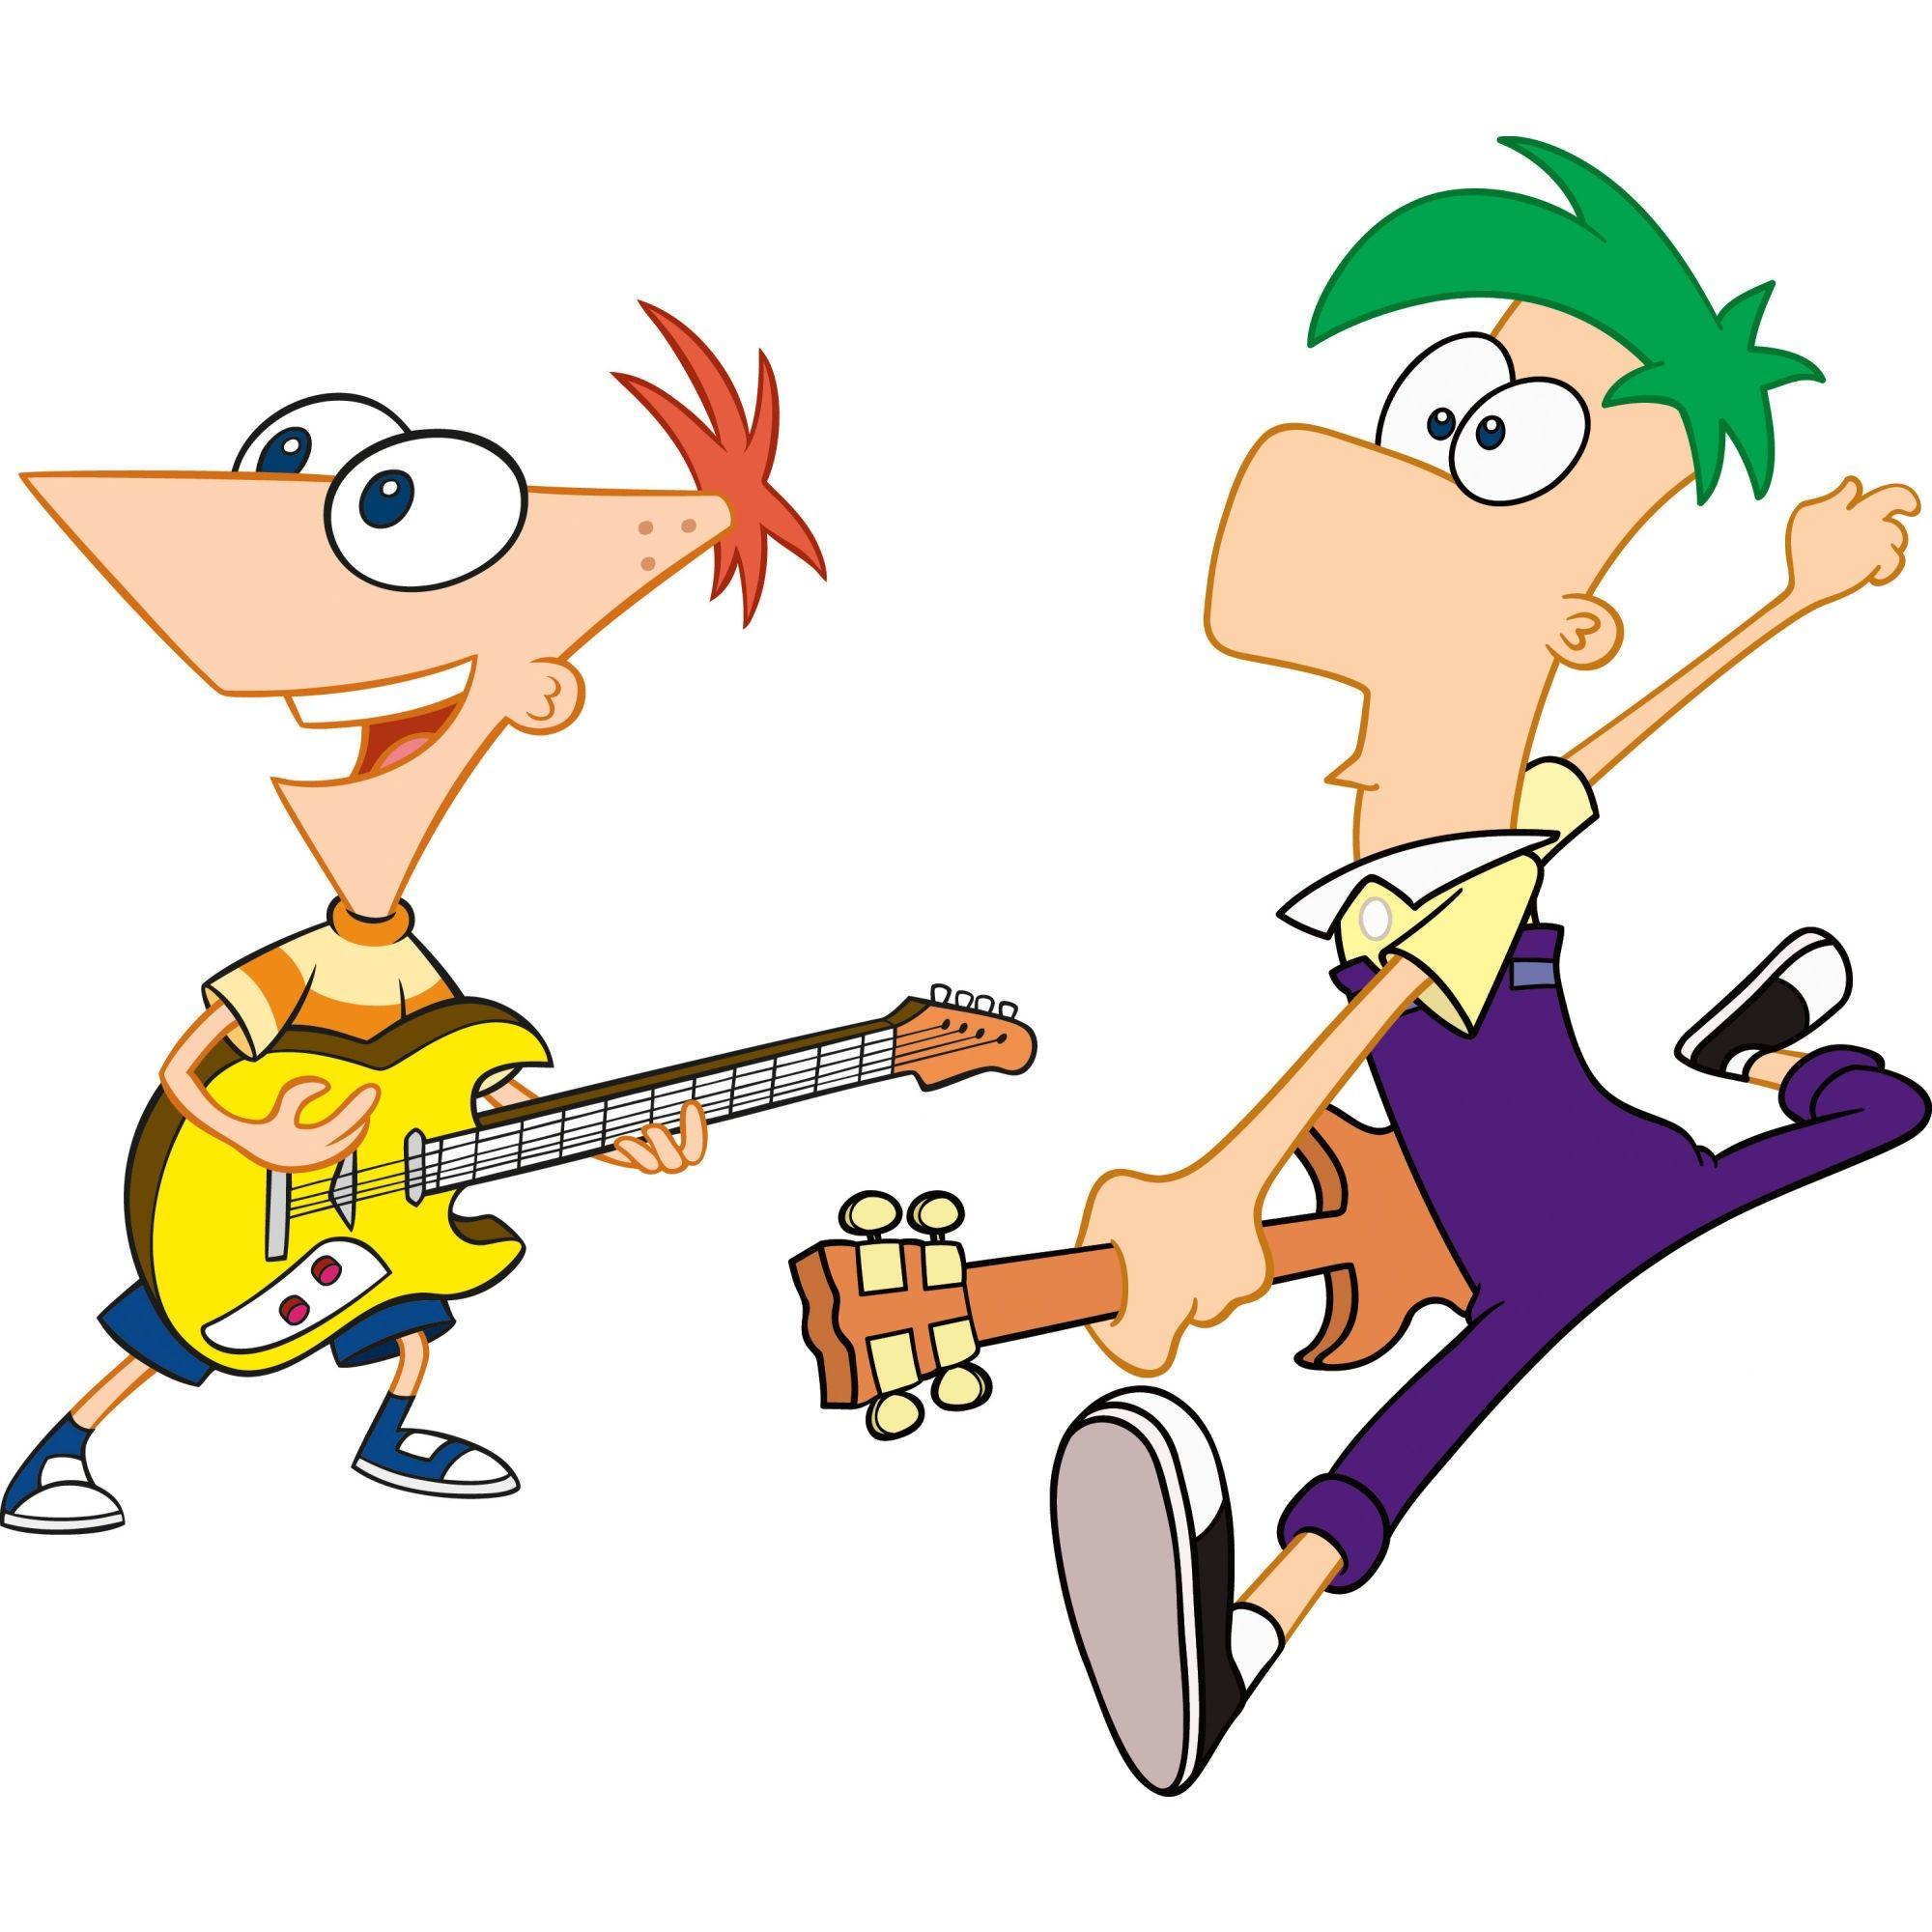 HD Phineas And Ferb Wallpaper and Photo. HD Cartoons Wallpaper